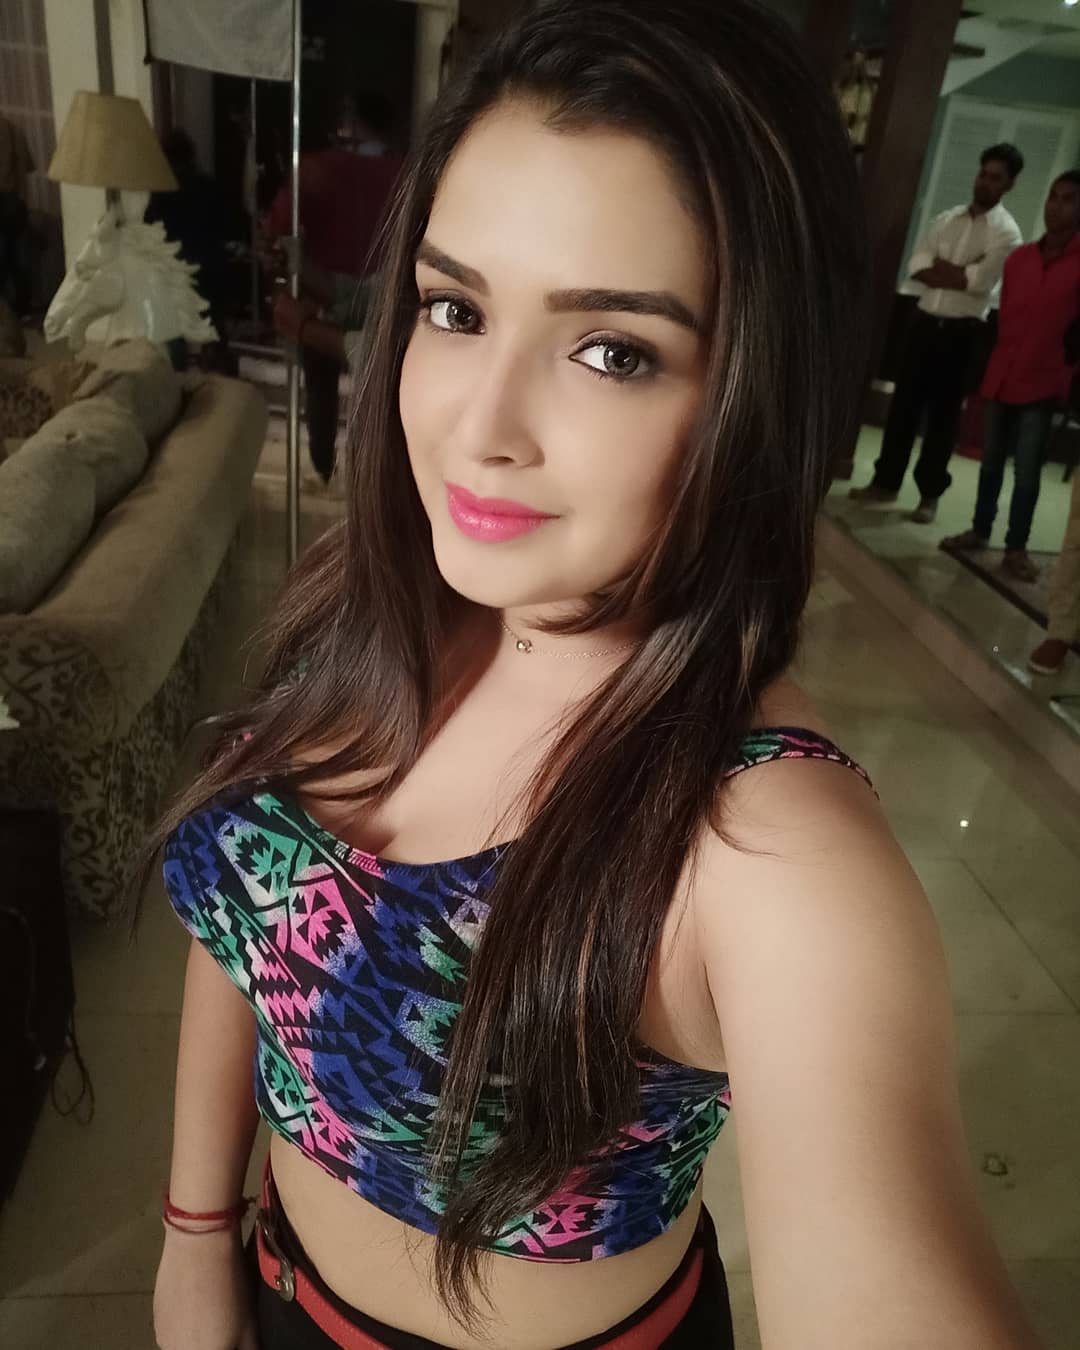 Amrapali Dubey P Video Com - Amrapali Dubey HD Wallpapers, Photos, Images, Pics - Bhojpuri Gallery